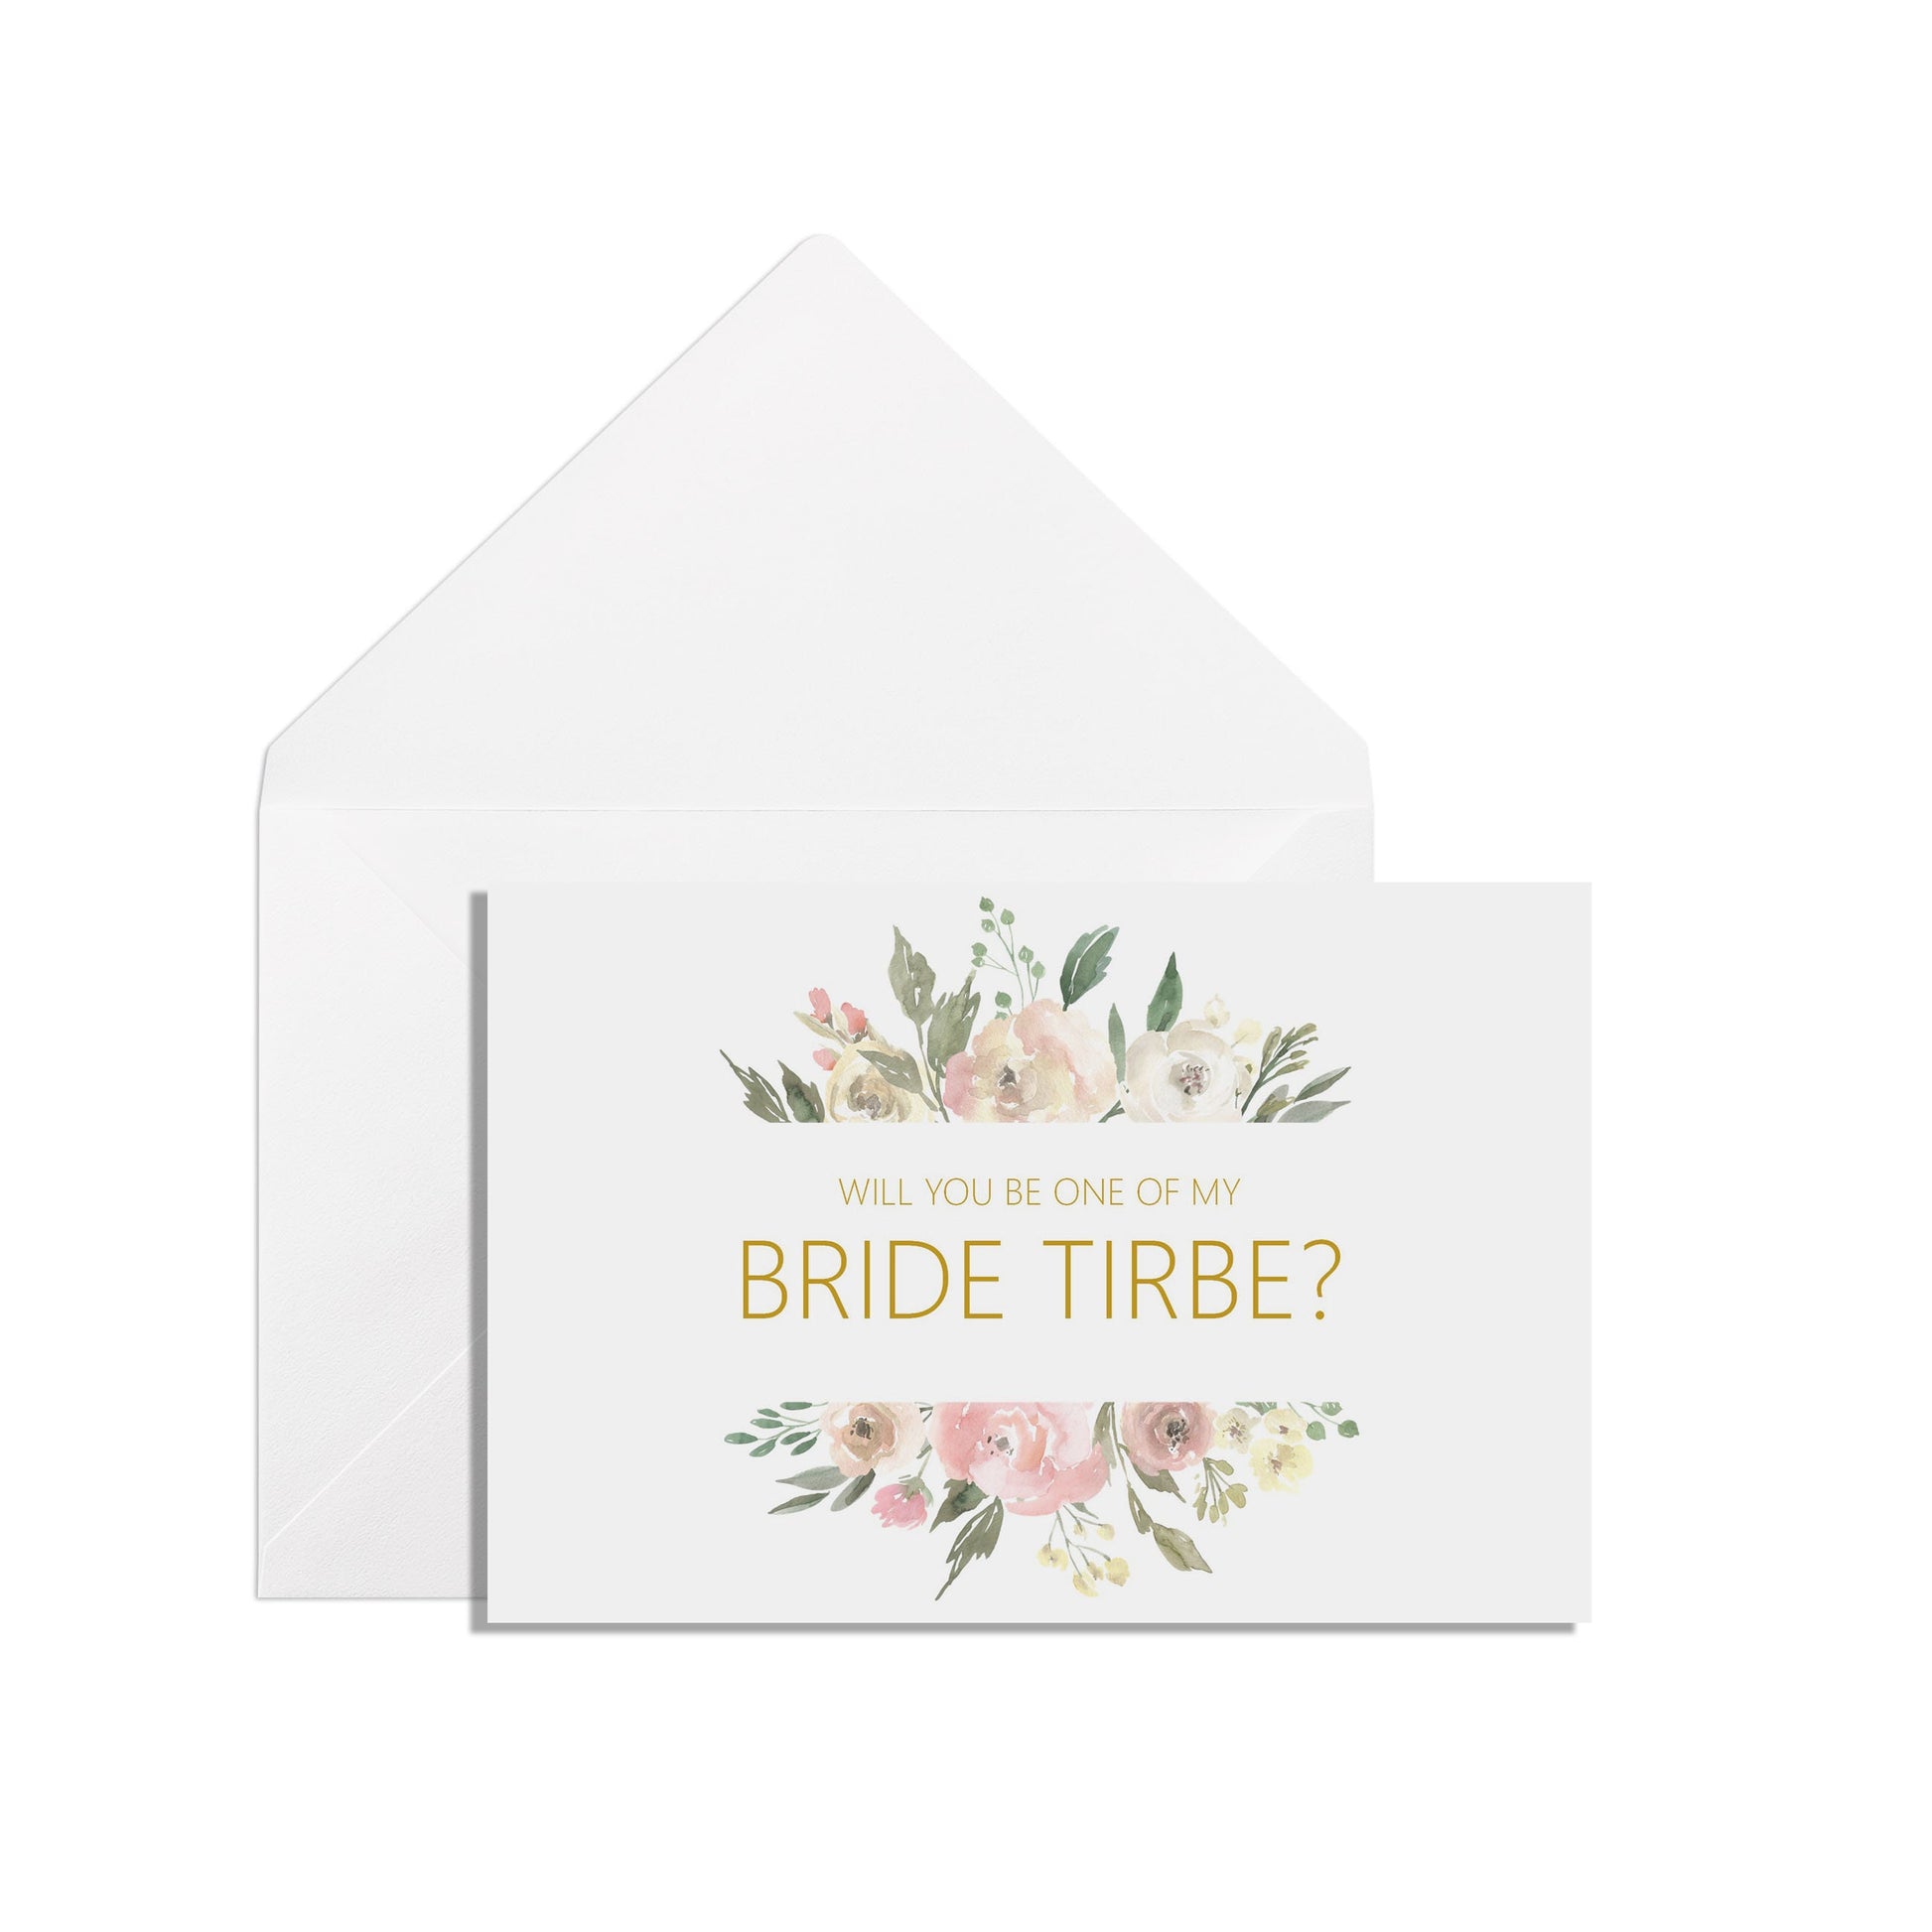 Will You Be Part Of My Bride Tribe?Proposal Card - Blush Floral